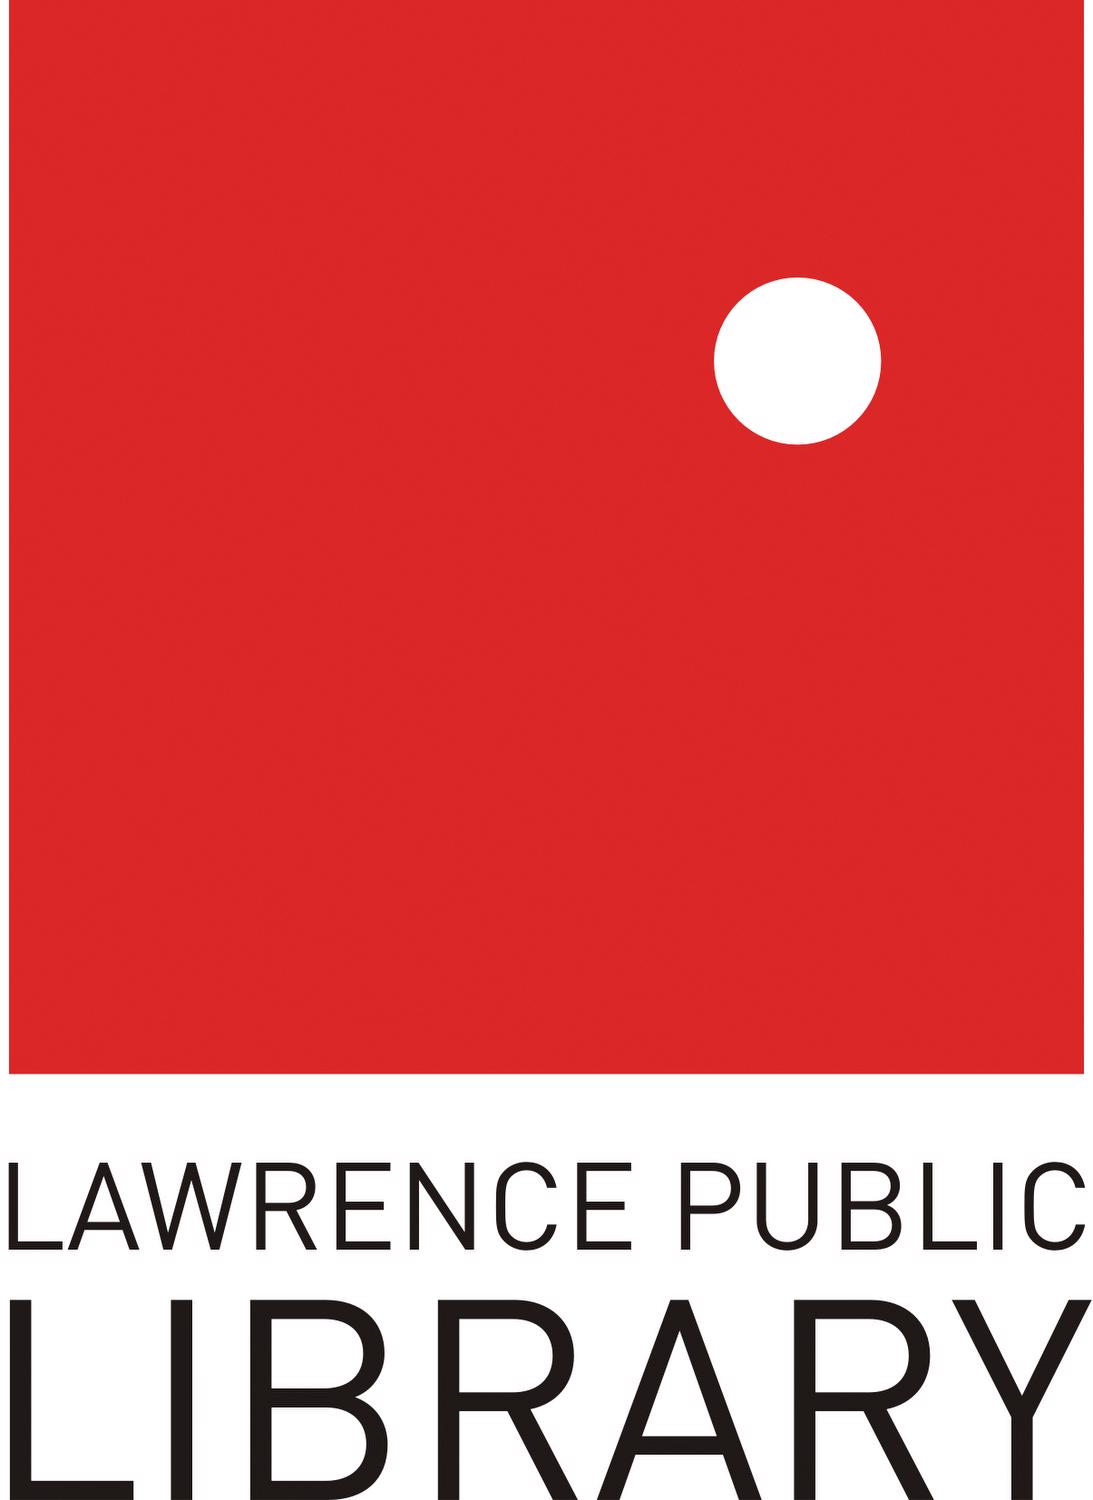 Lawrence Public Library logo red square with white circle